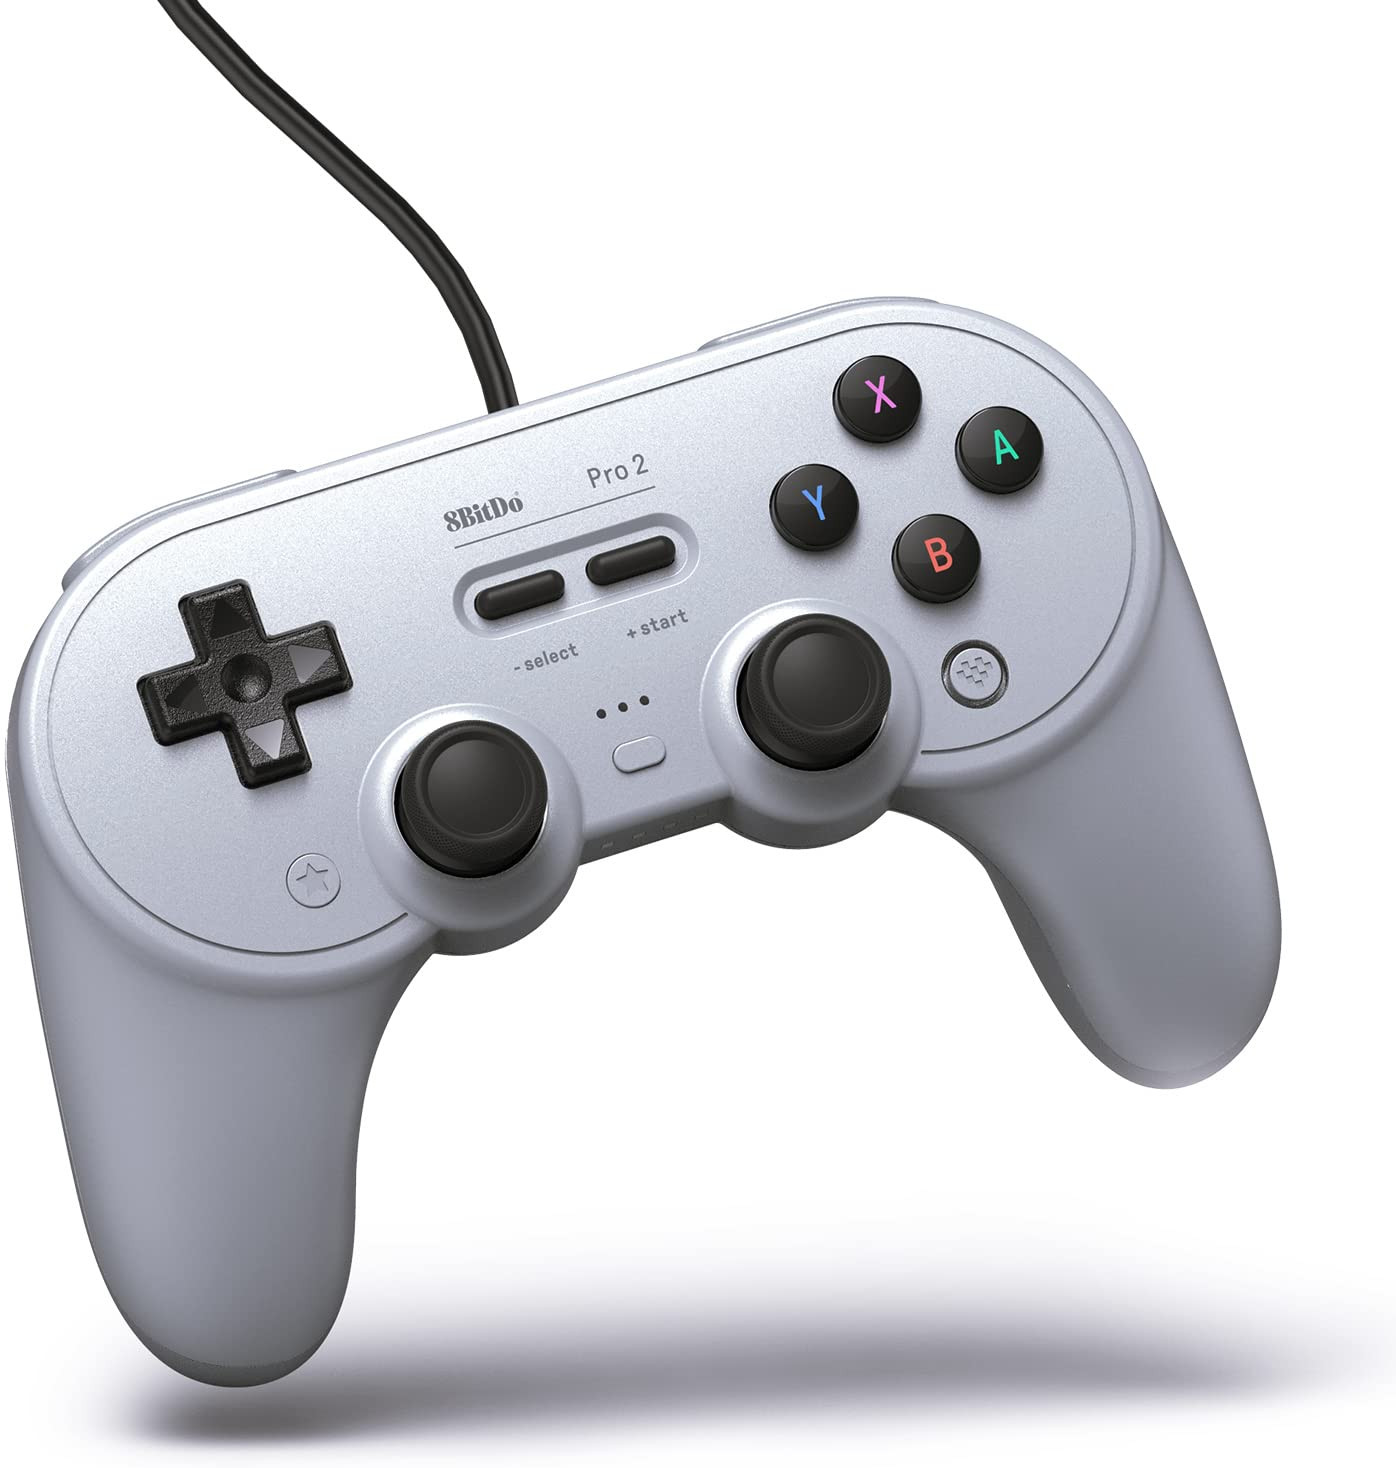 Pro 2 Wired Gamepad (Gray Edition)